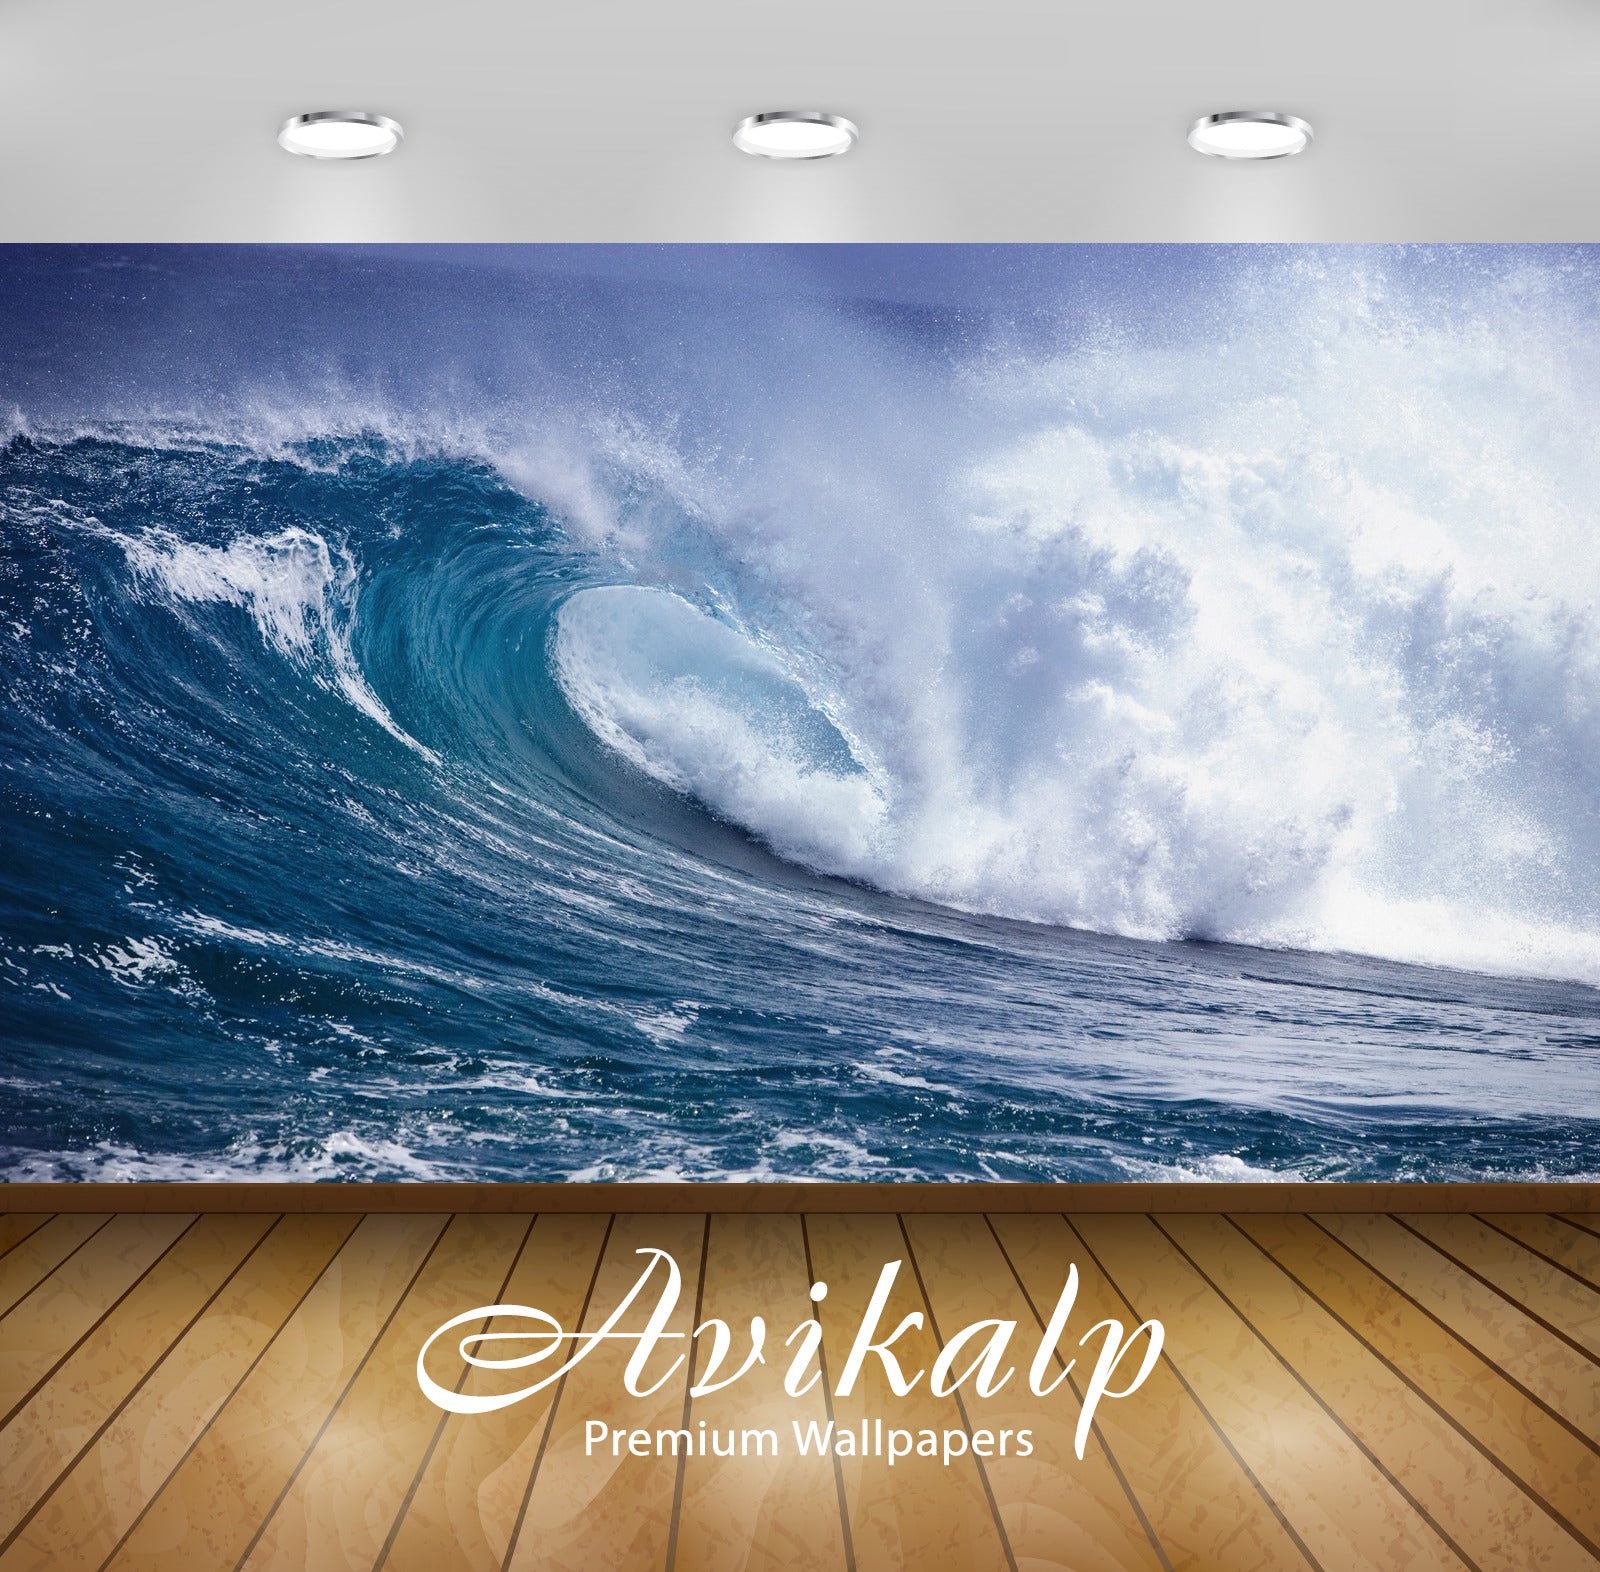 Avikalp Exclusive Awi1710 Amazing Sea Waves Full HD Wallpapers for Living room, Hall, Kids Room, Kit